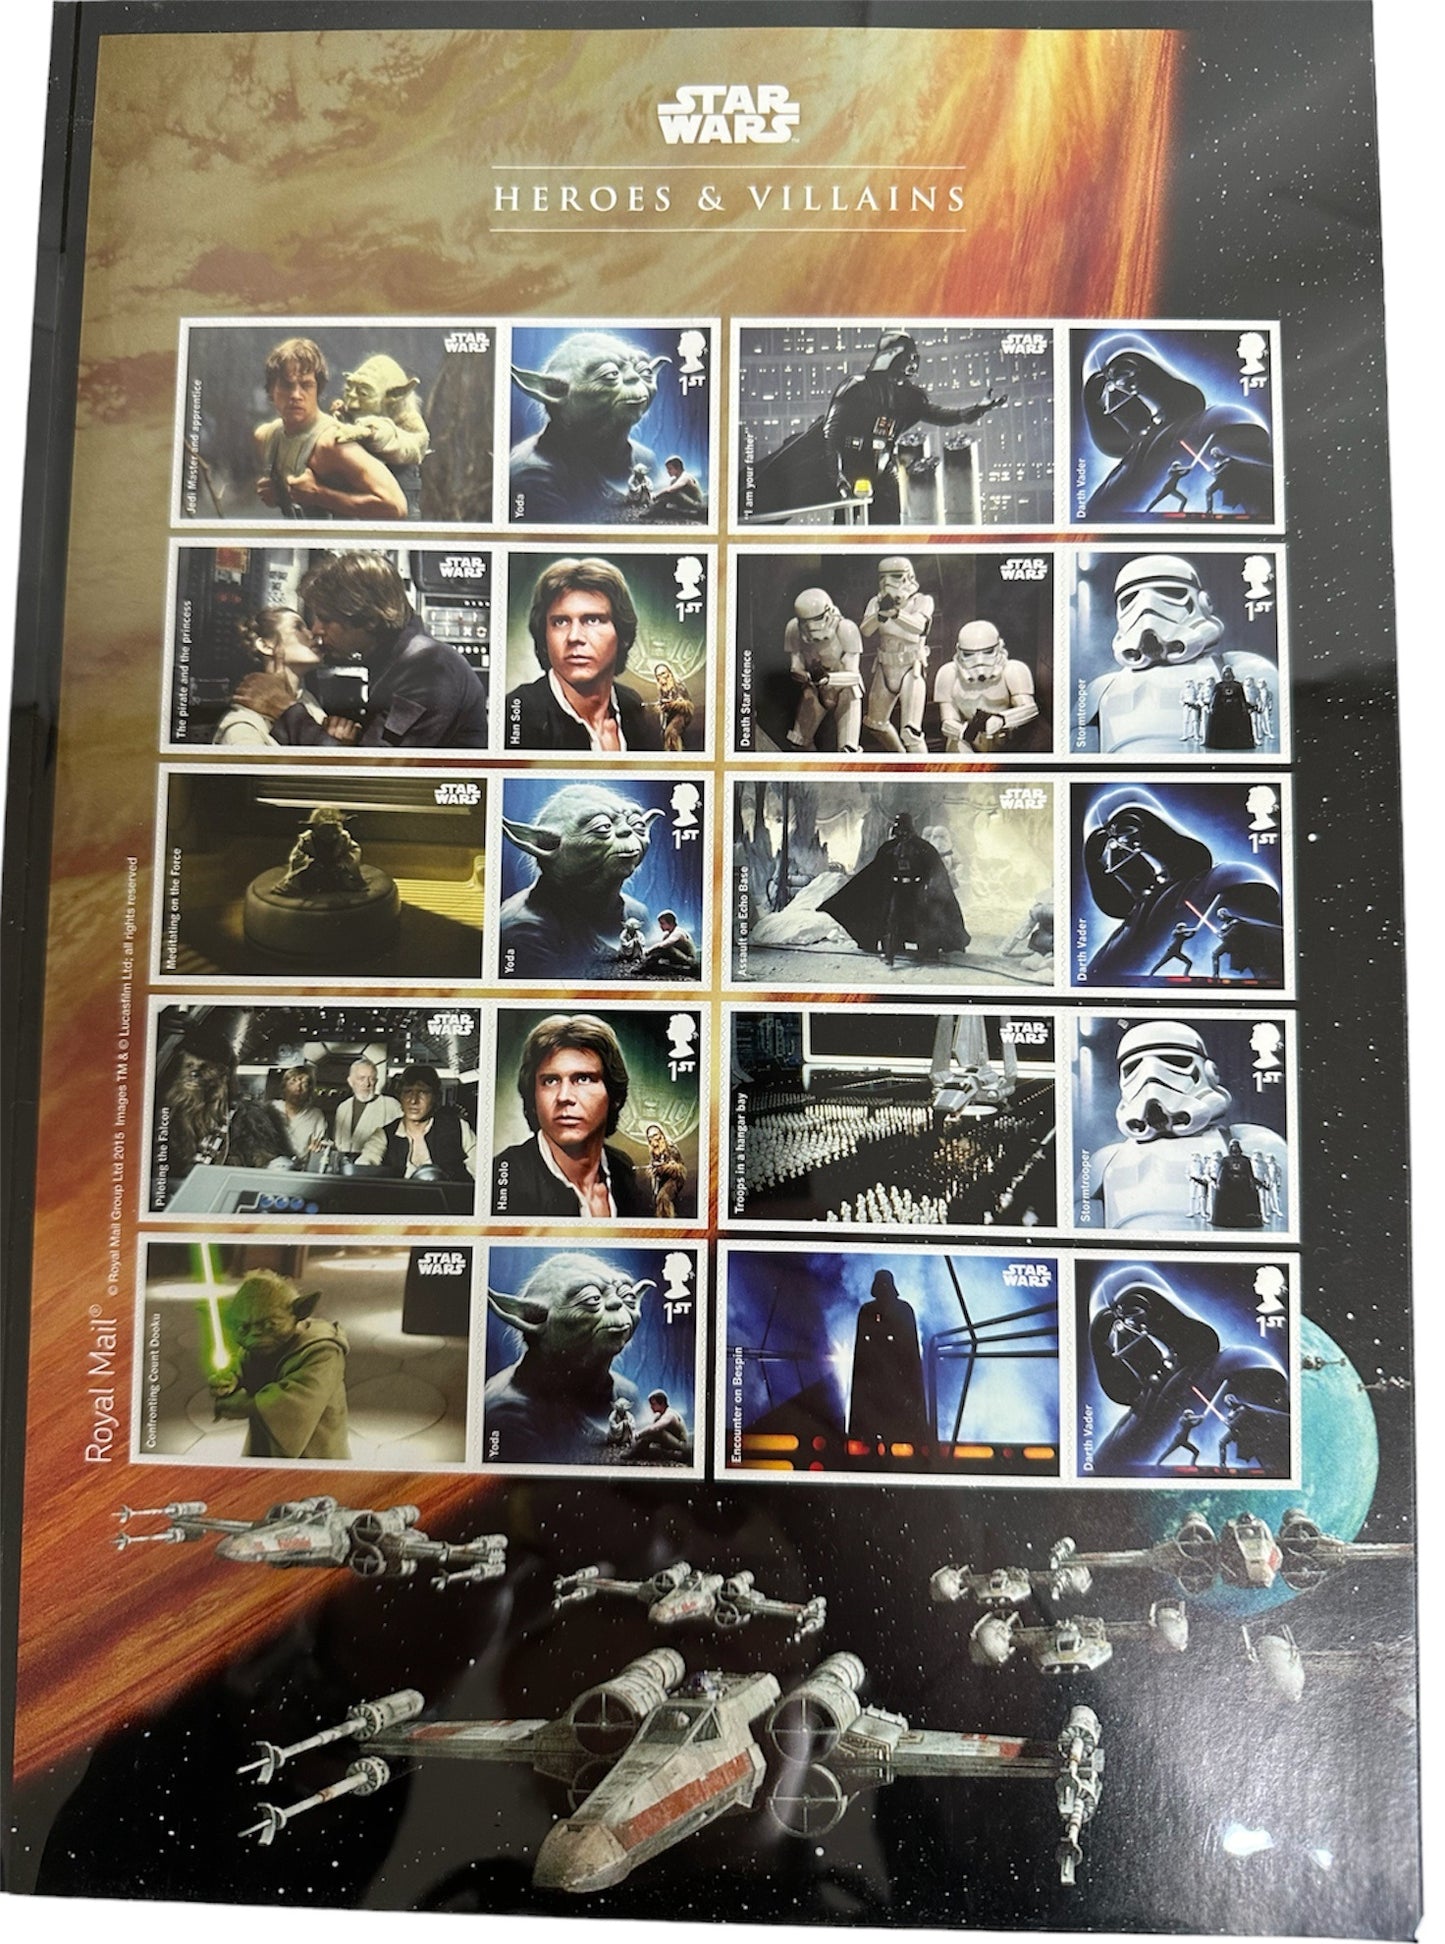 Vintage 2015 Star Wars Saga Heroes & Villains Limited Edition Royal Mails First Day Cover - Set of Two Covers With Display Card Shop Stock Room Find